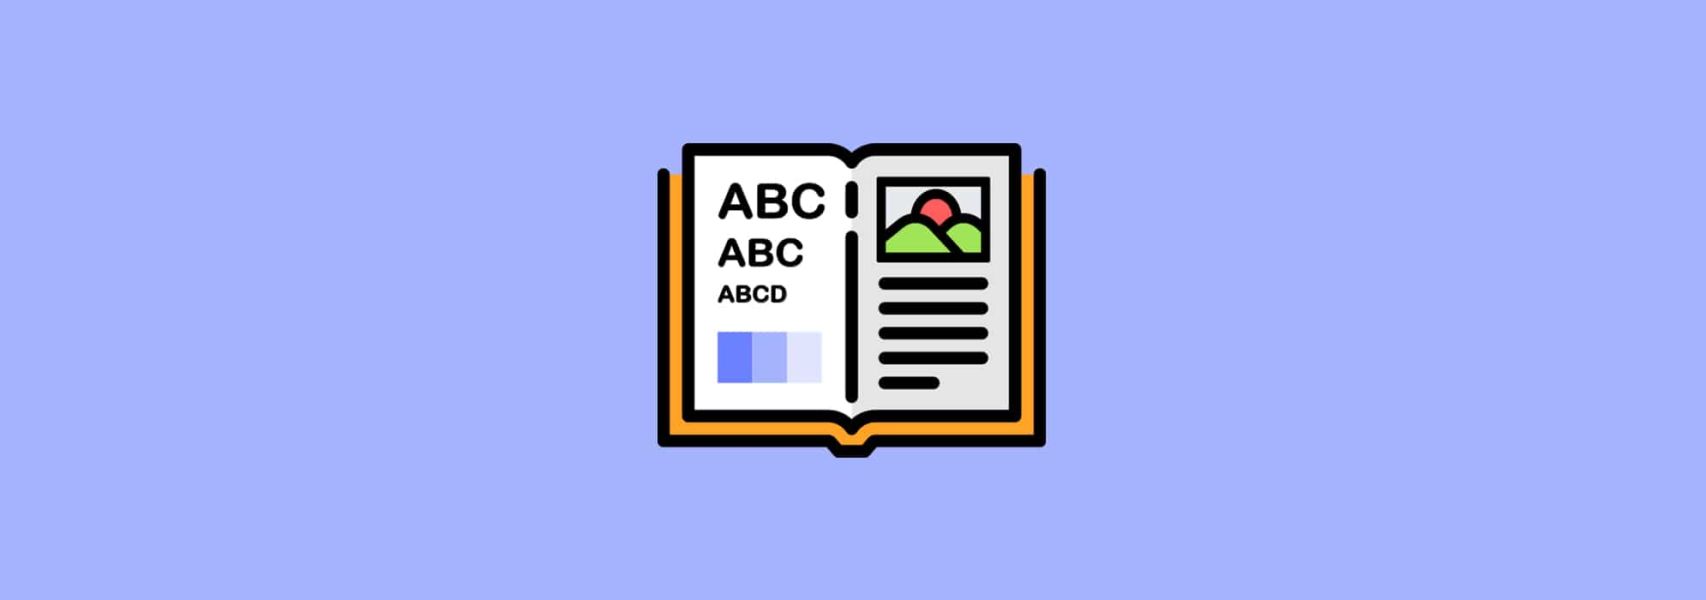 A book cover with the letters ABC and ABC on it. Contact Viabrand for a brand style guide. Learn more about us!